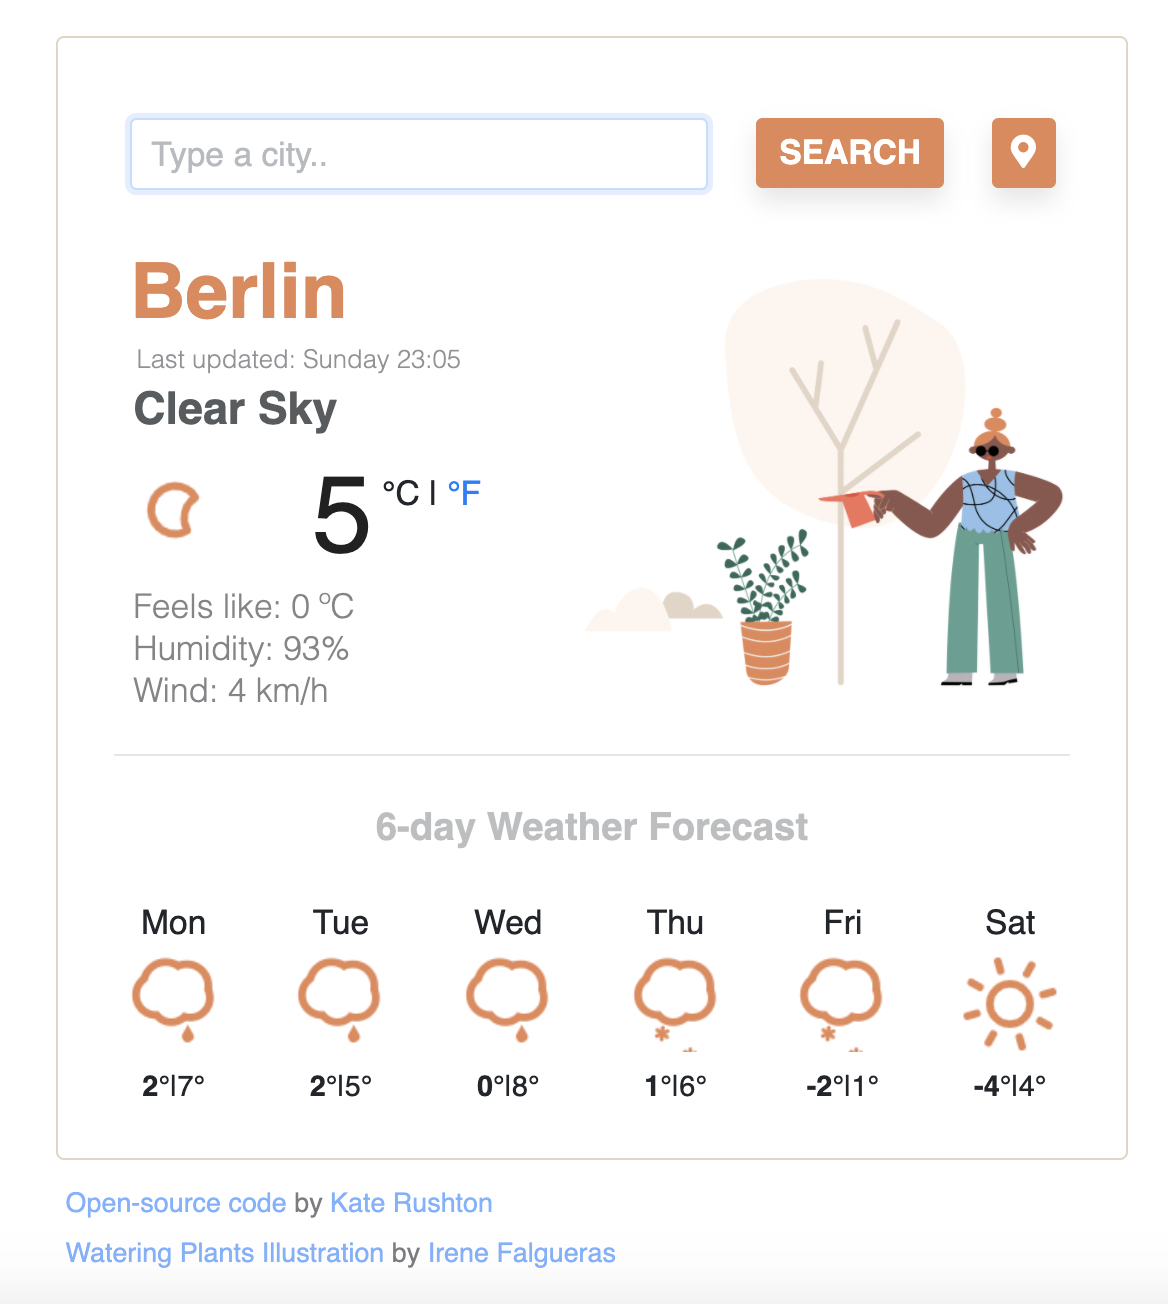 Image of a weather app